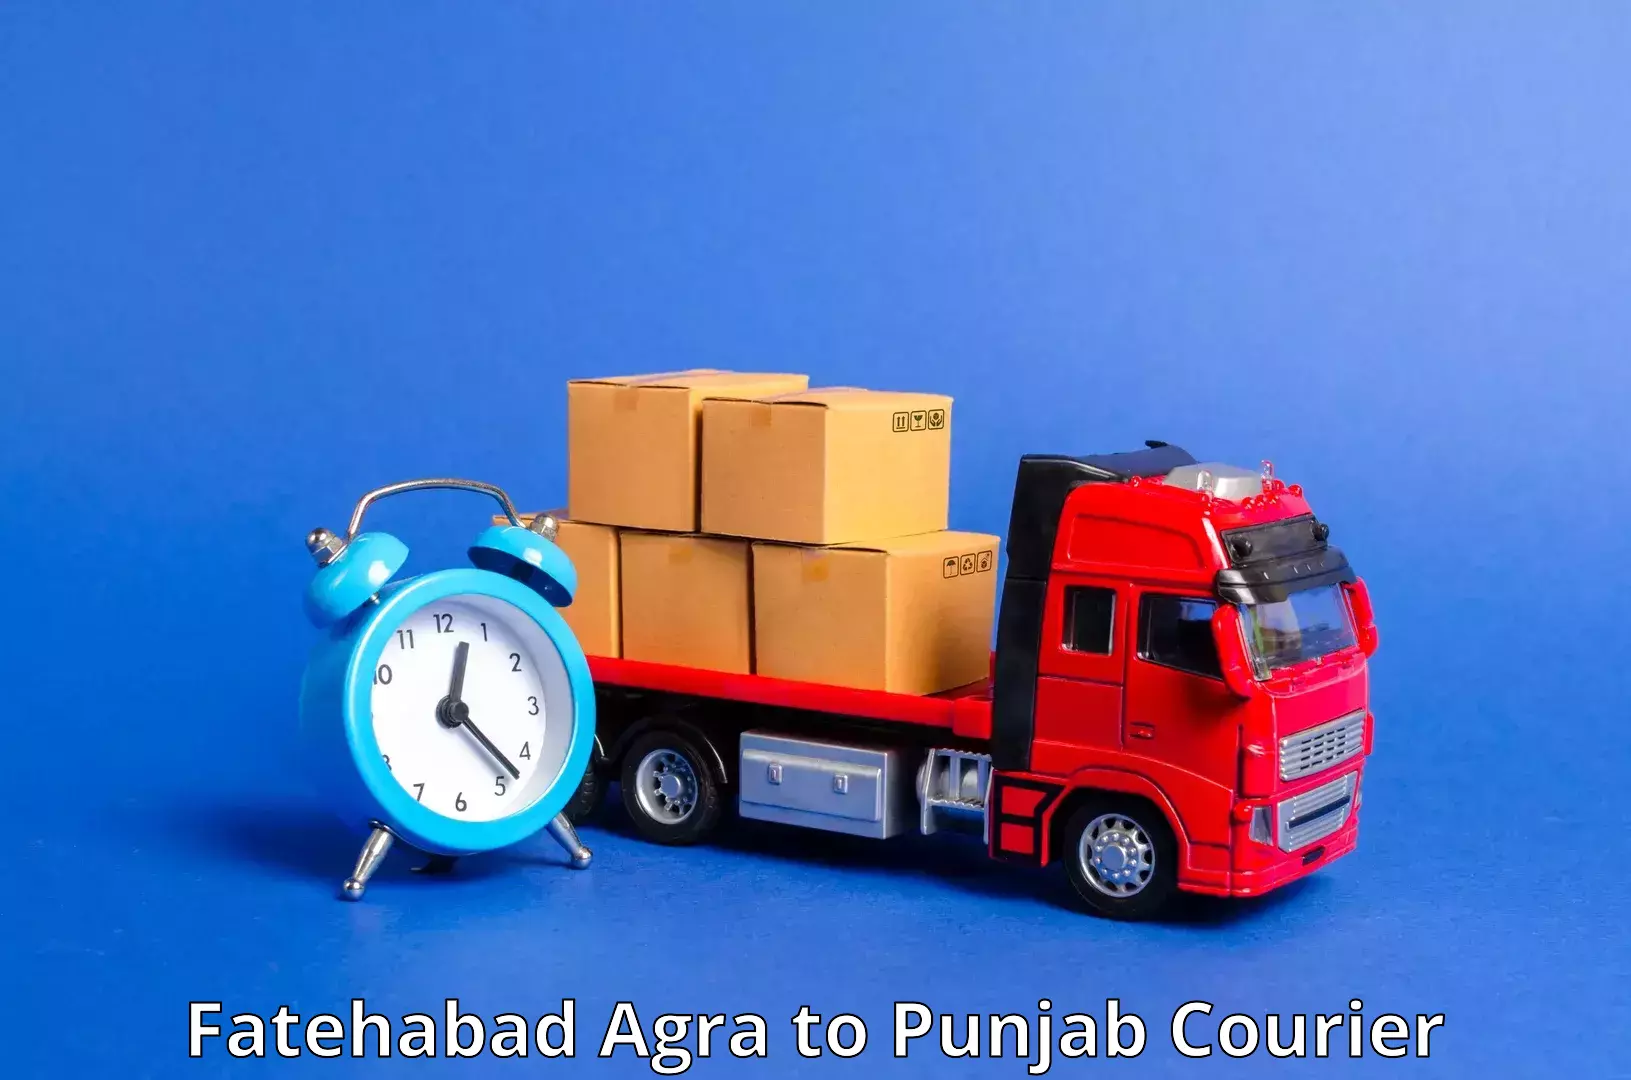 Next-day delivery options Fatehabad Agra to Malout